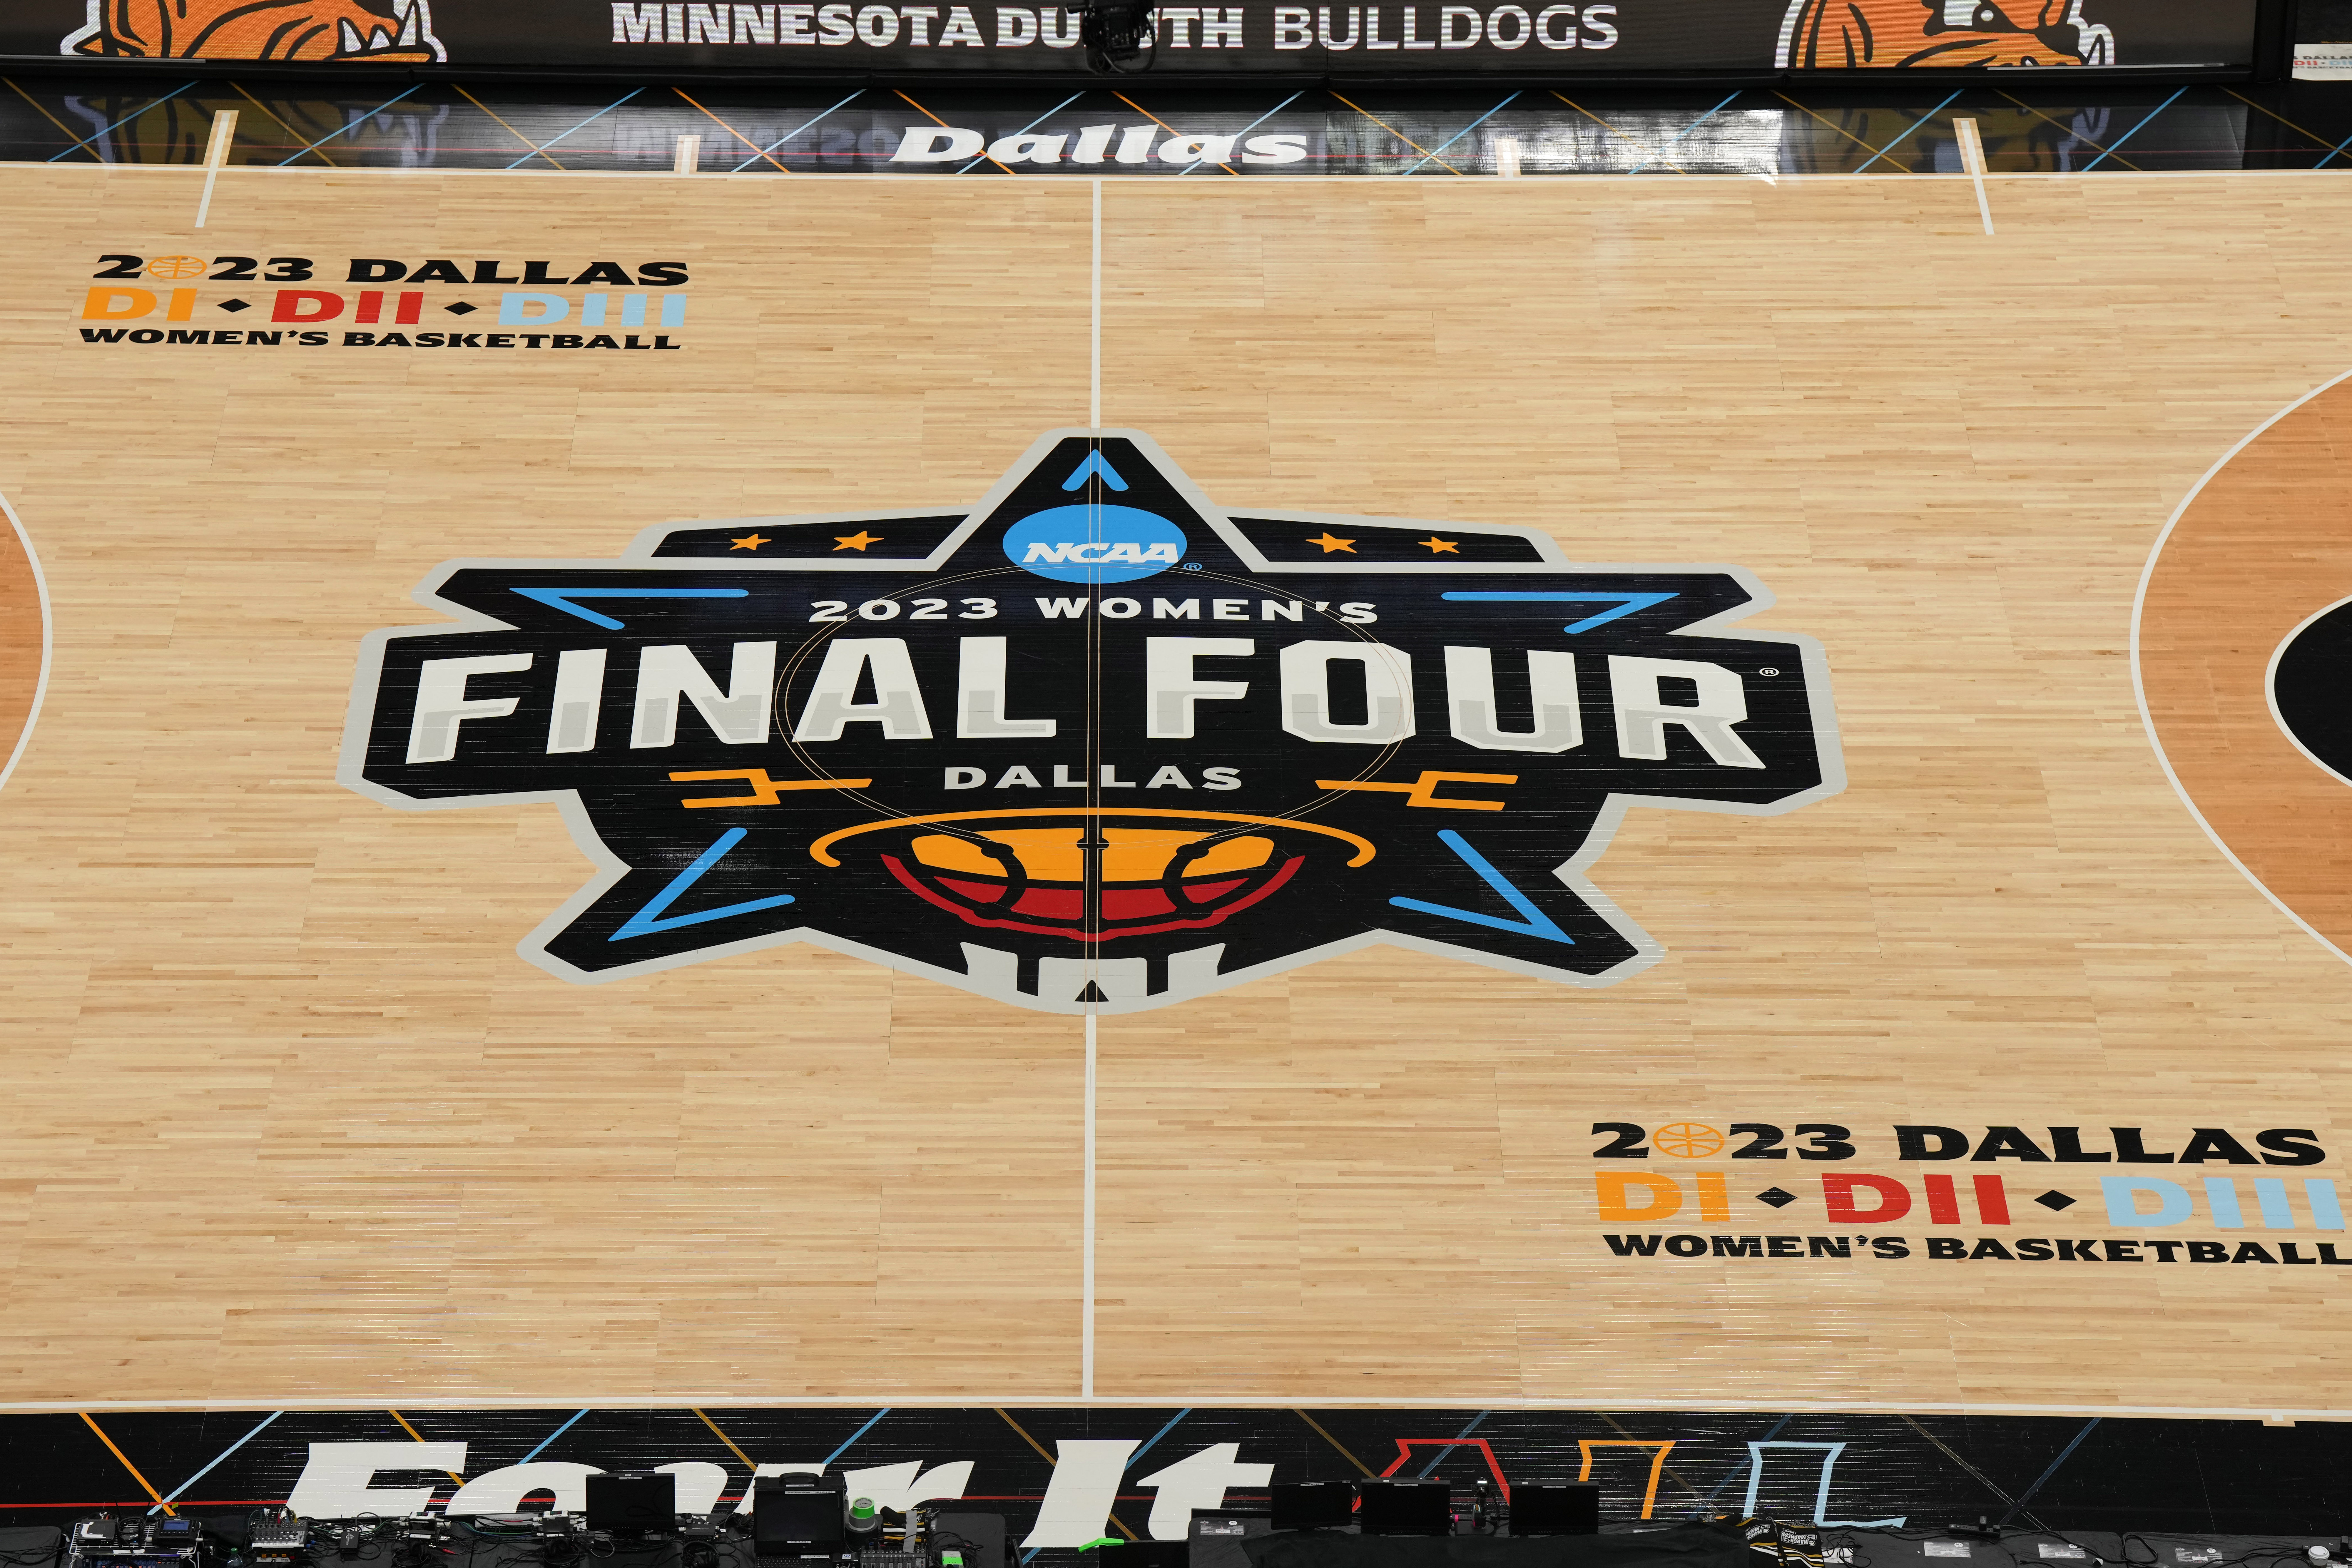 Sights and sounds from the women’s Final Four open practices